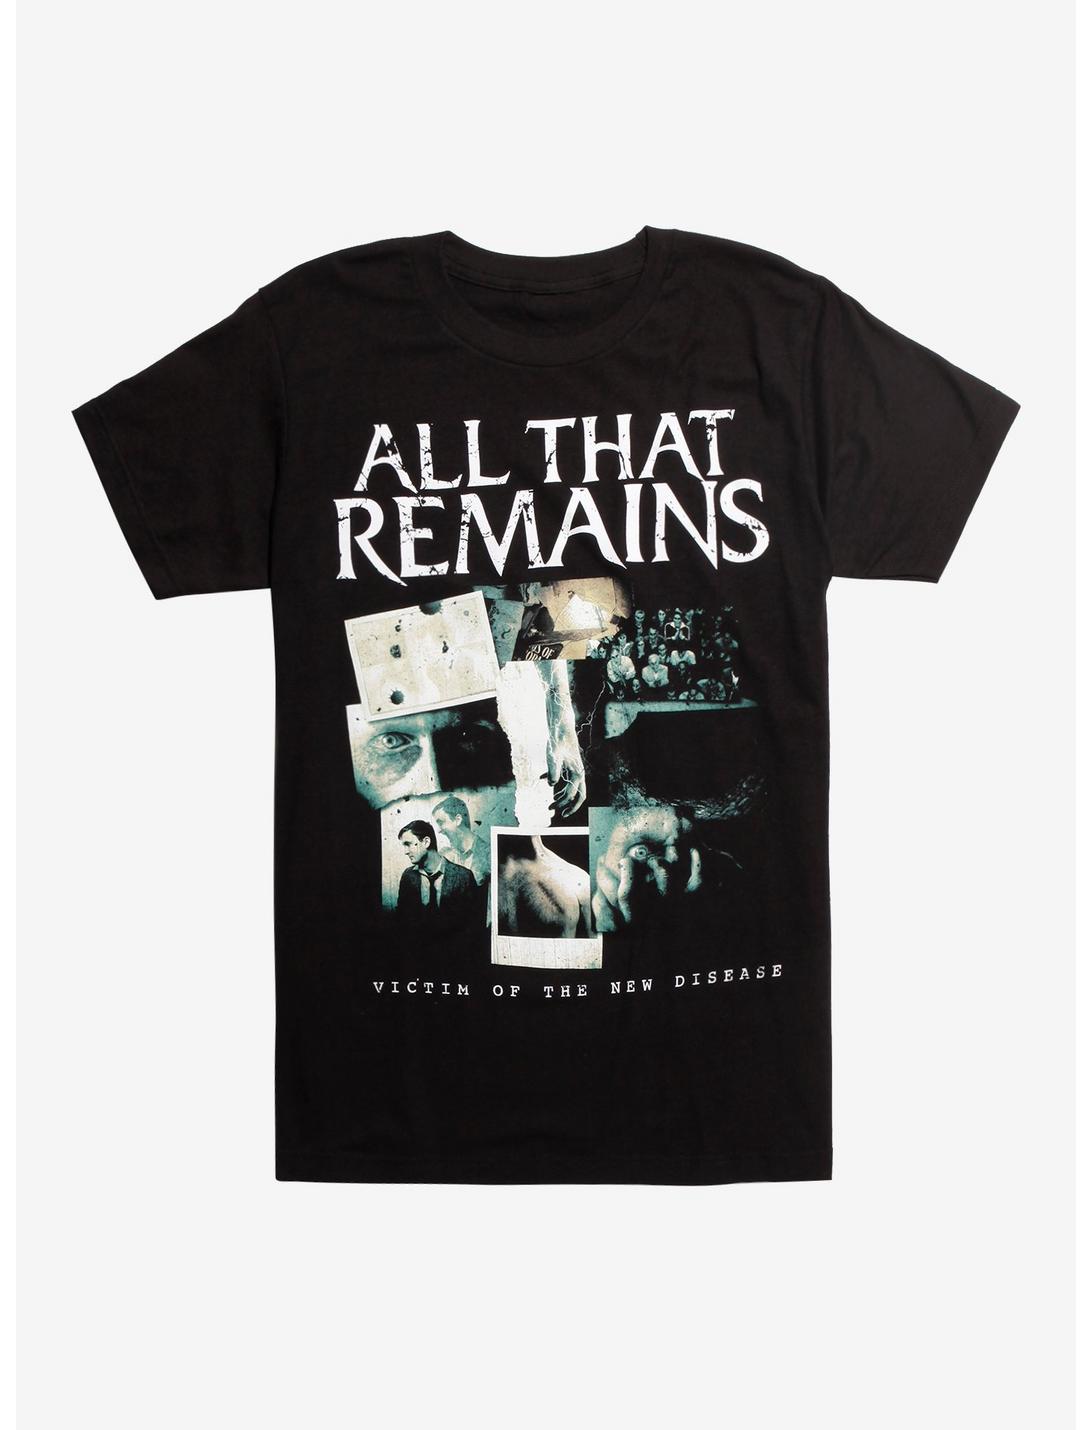 All That Remains Victim Of The New Disease T-Shirt, BLACK, hi-res